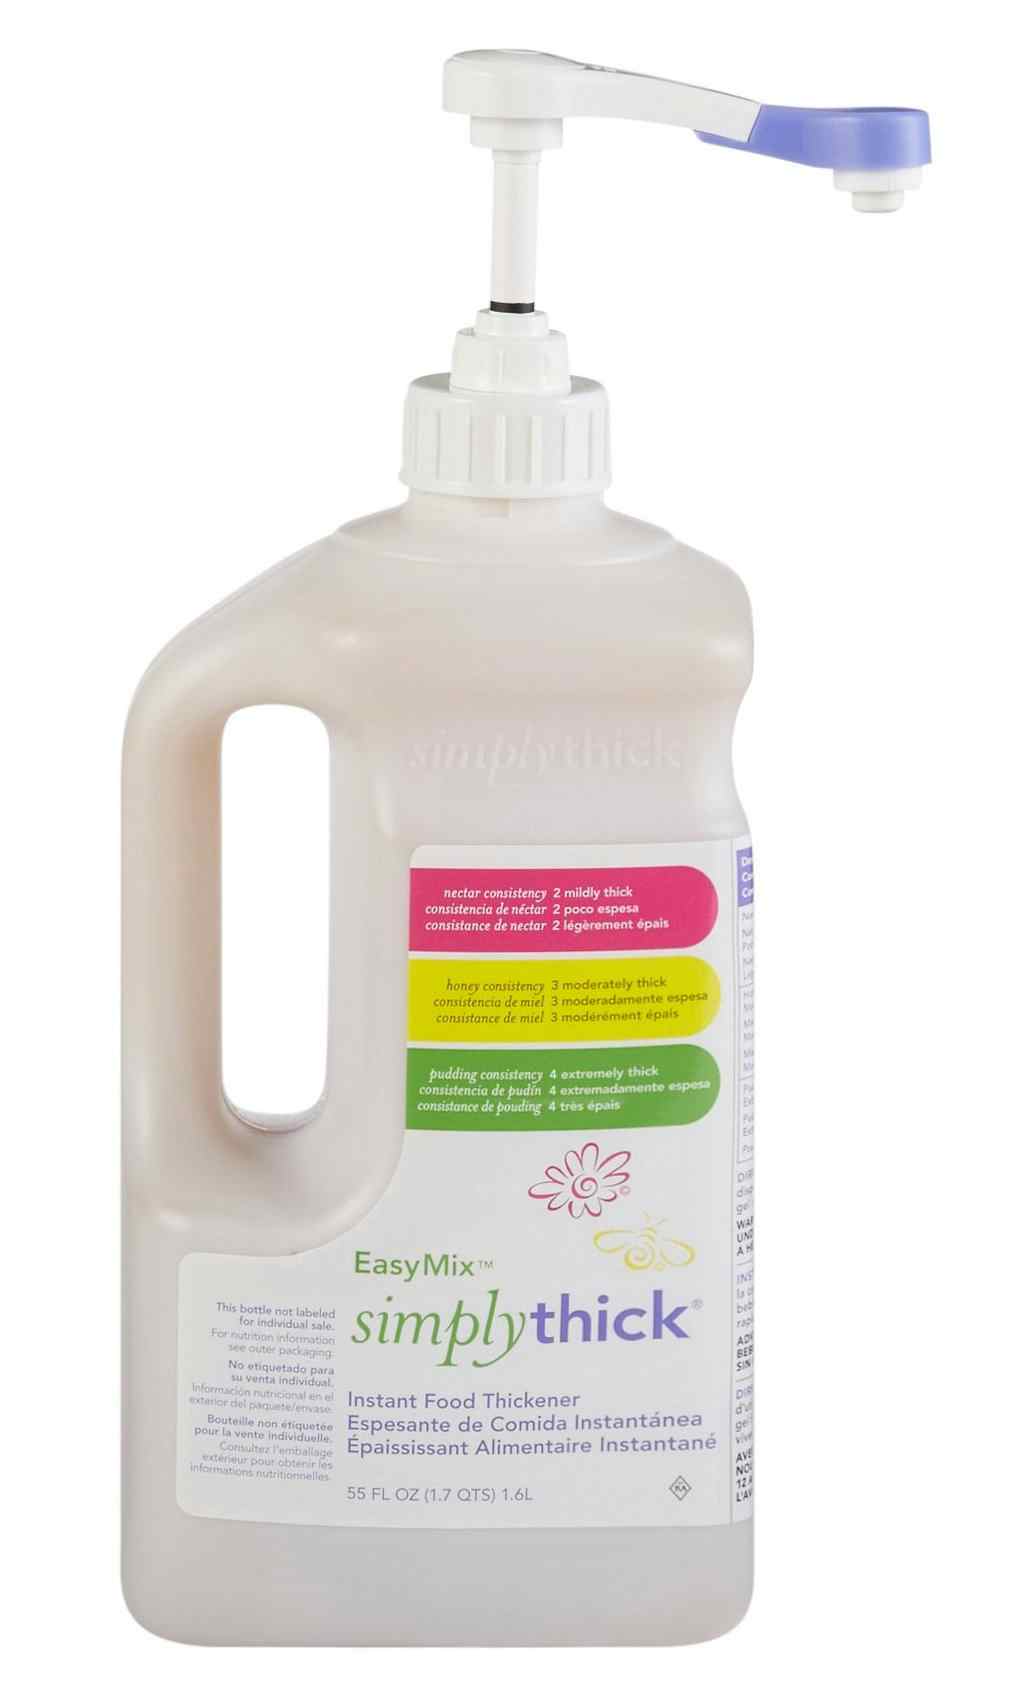 SimplyThick EasyMix Instant Food Thickener, 1.6 Liter